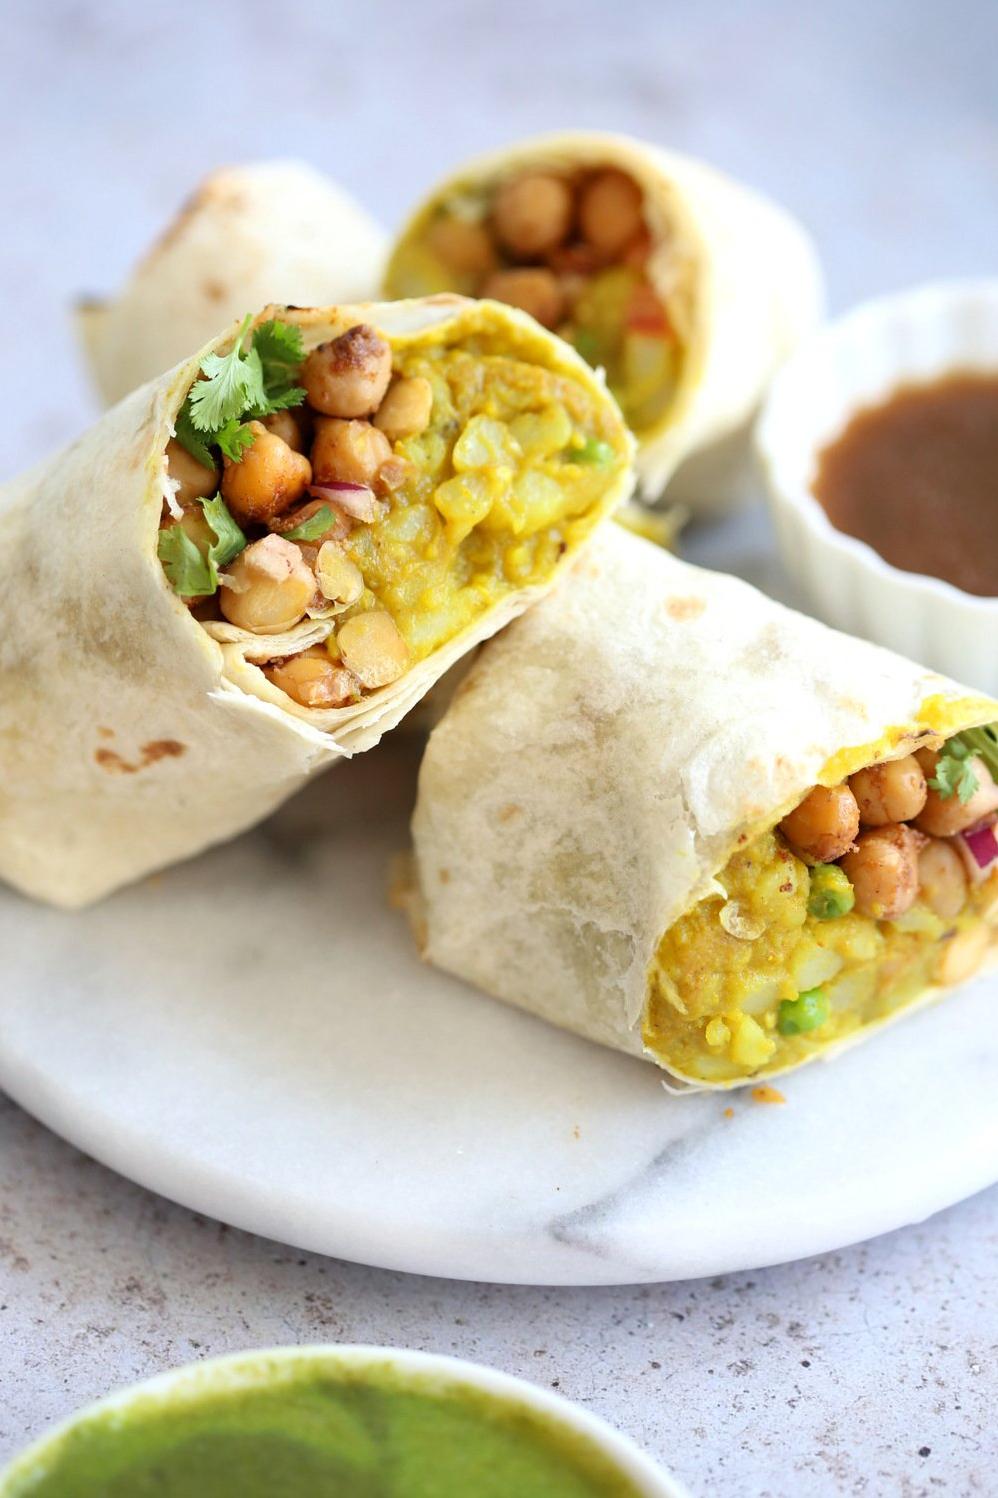  These wraps are a vegetarian and protein-packed meal that will satisfy any hunger.